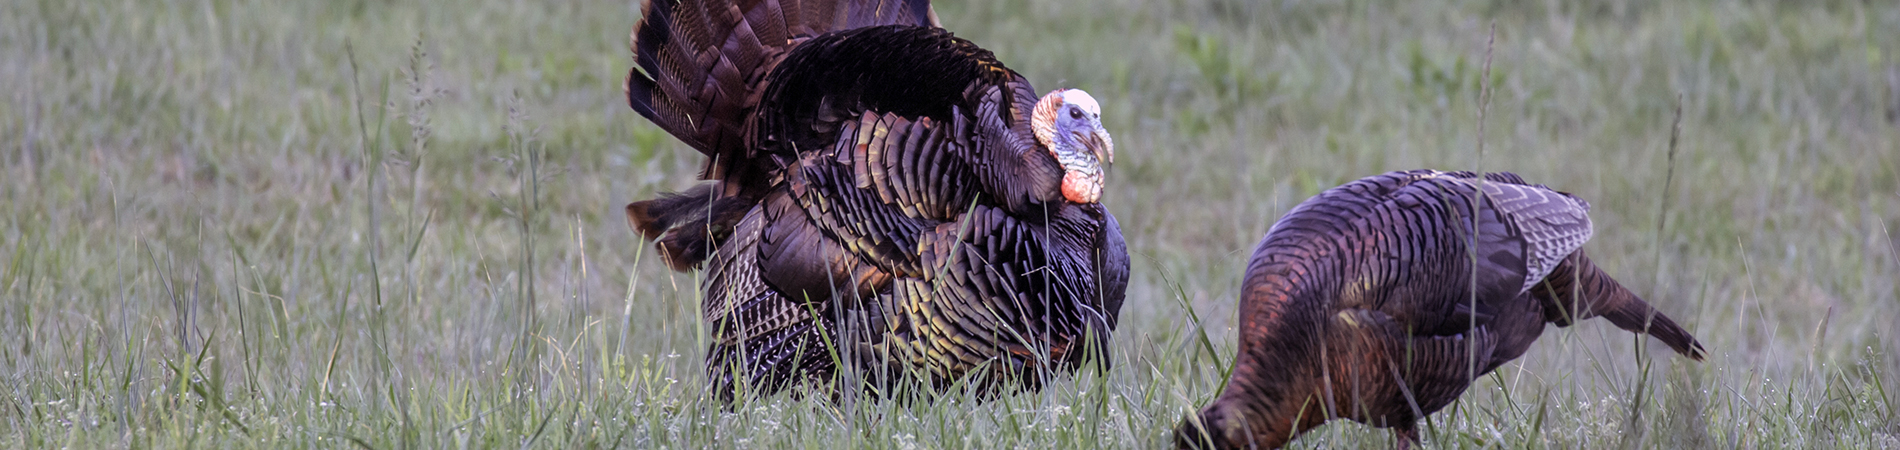 2019 Statewide Turkey Hunting Season Opens March 23...in Georgia